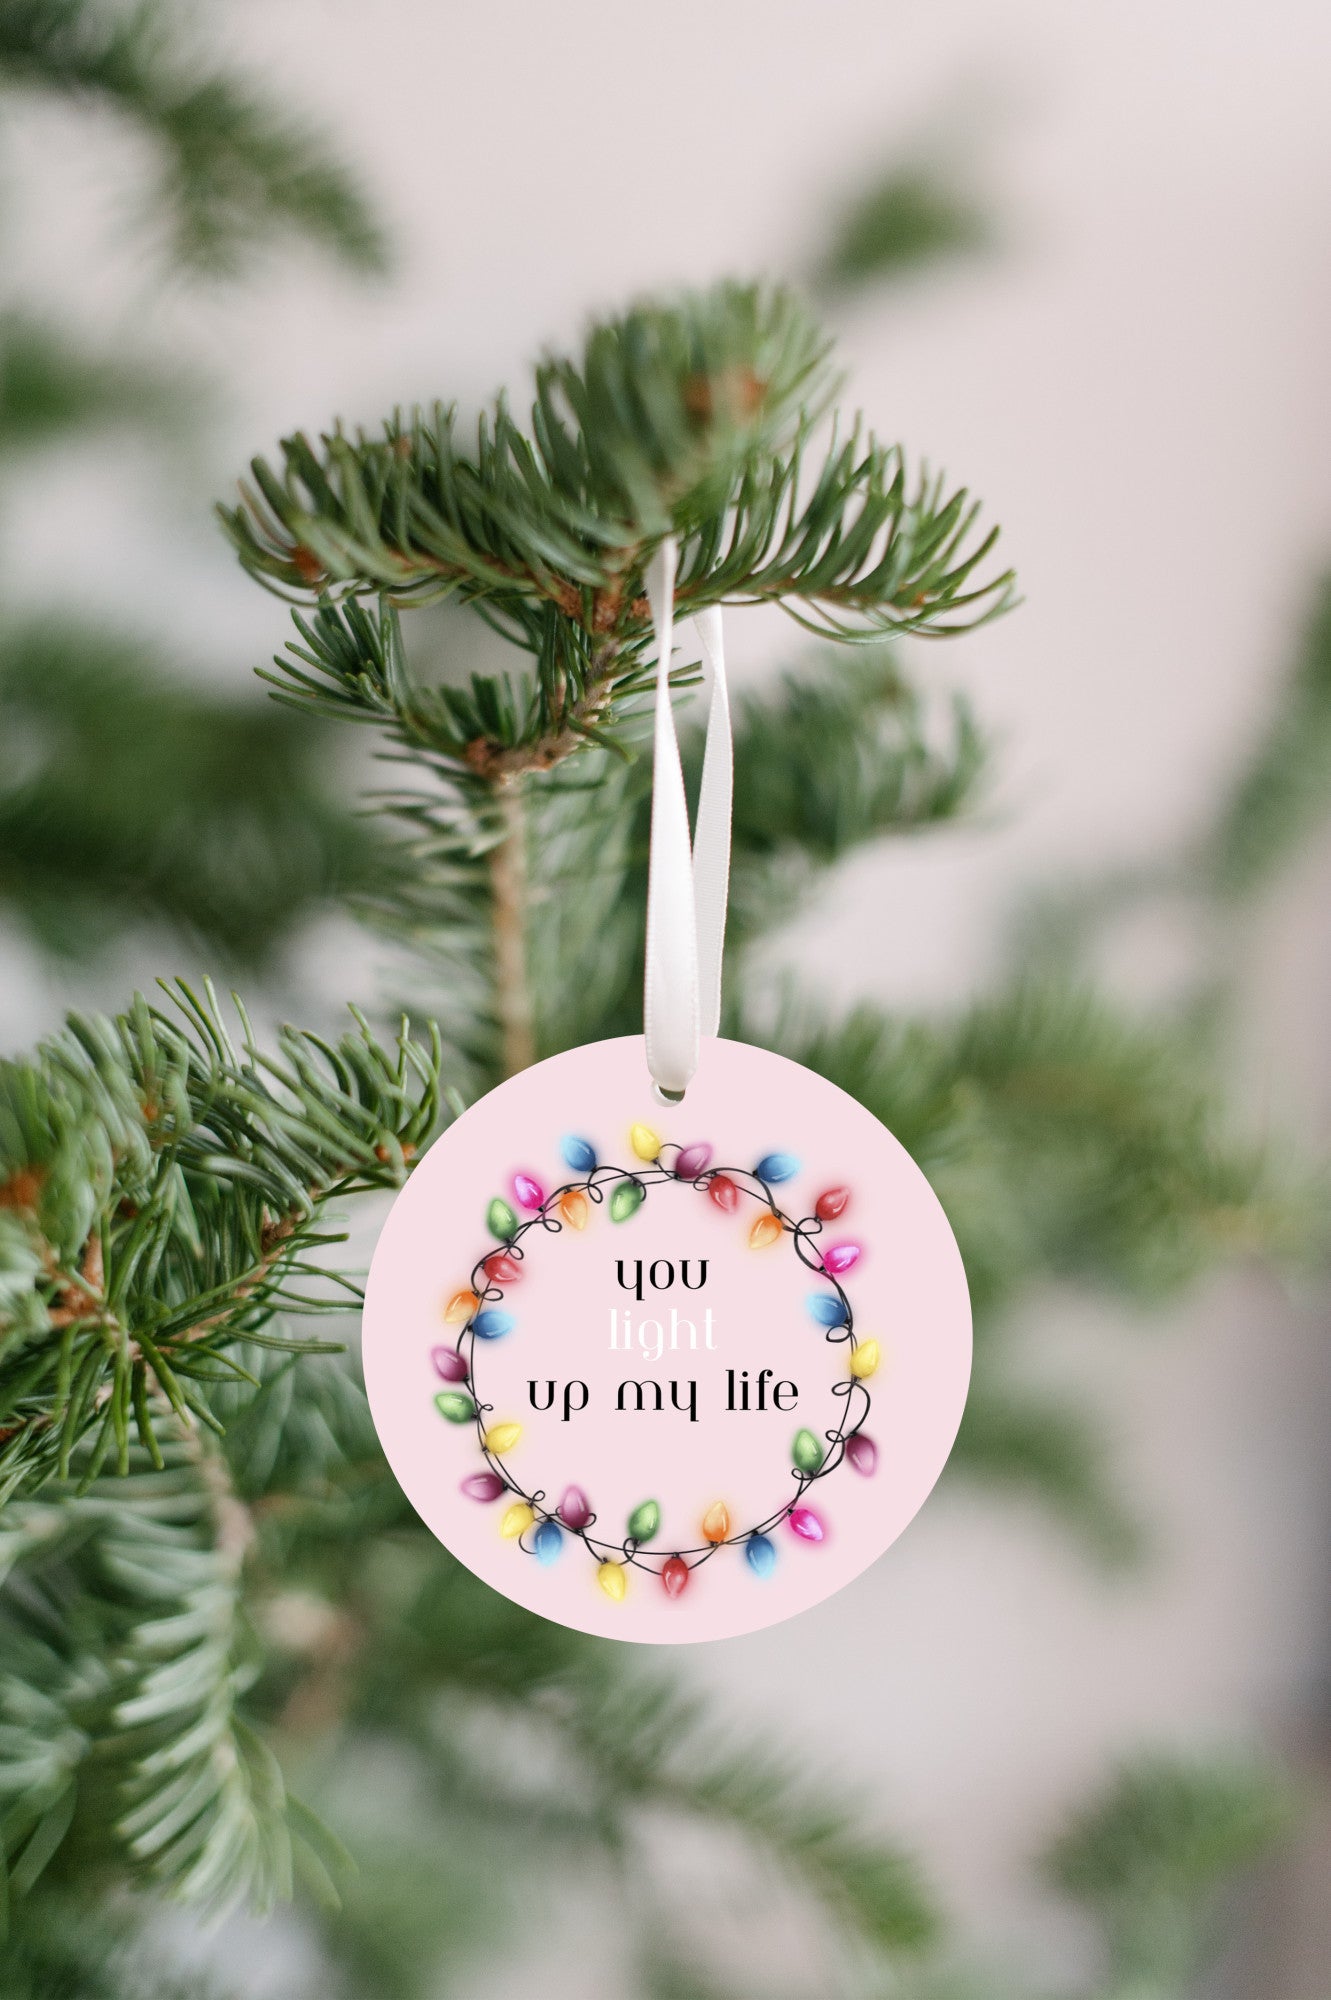 You light up my life - friend Christmas ornament pink